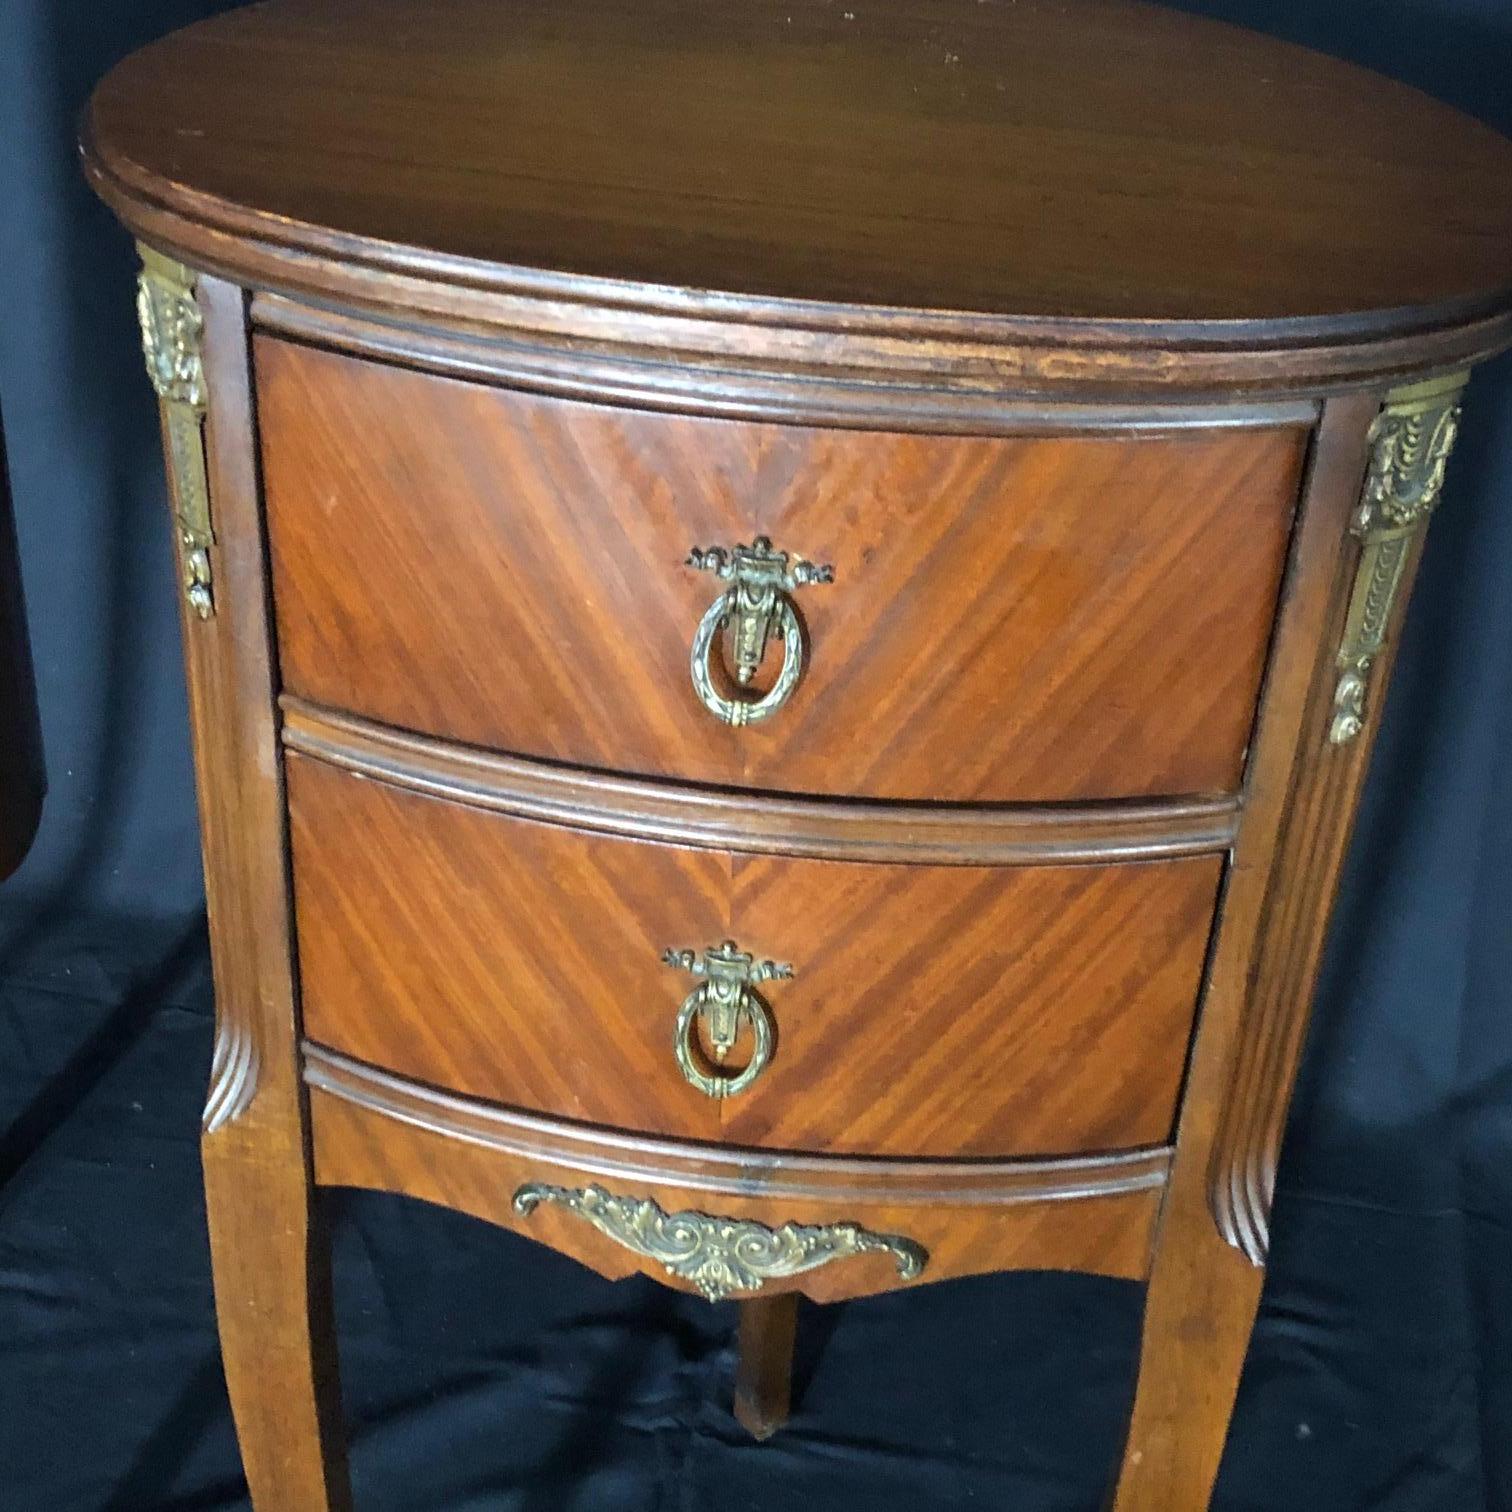 Pair of mahogany Louis XV oval style nightstands having three legs, original brass pulls and side mounts as well as scroll feet. The two drawers on each stand are beautifully adorned with wreath and ribbon pulls over aprons with grape leaf and